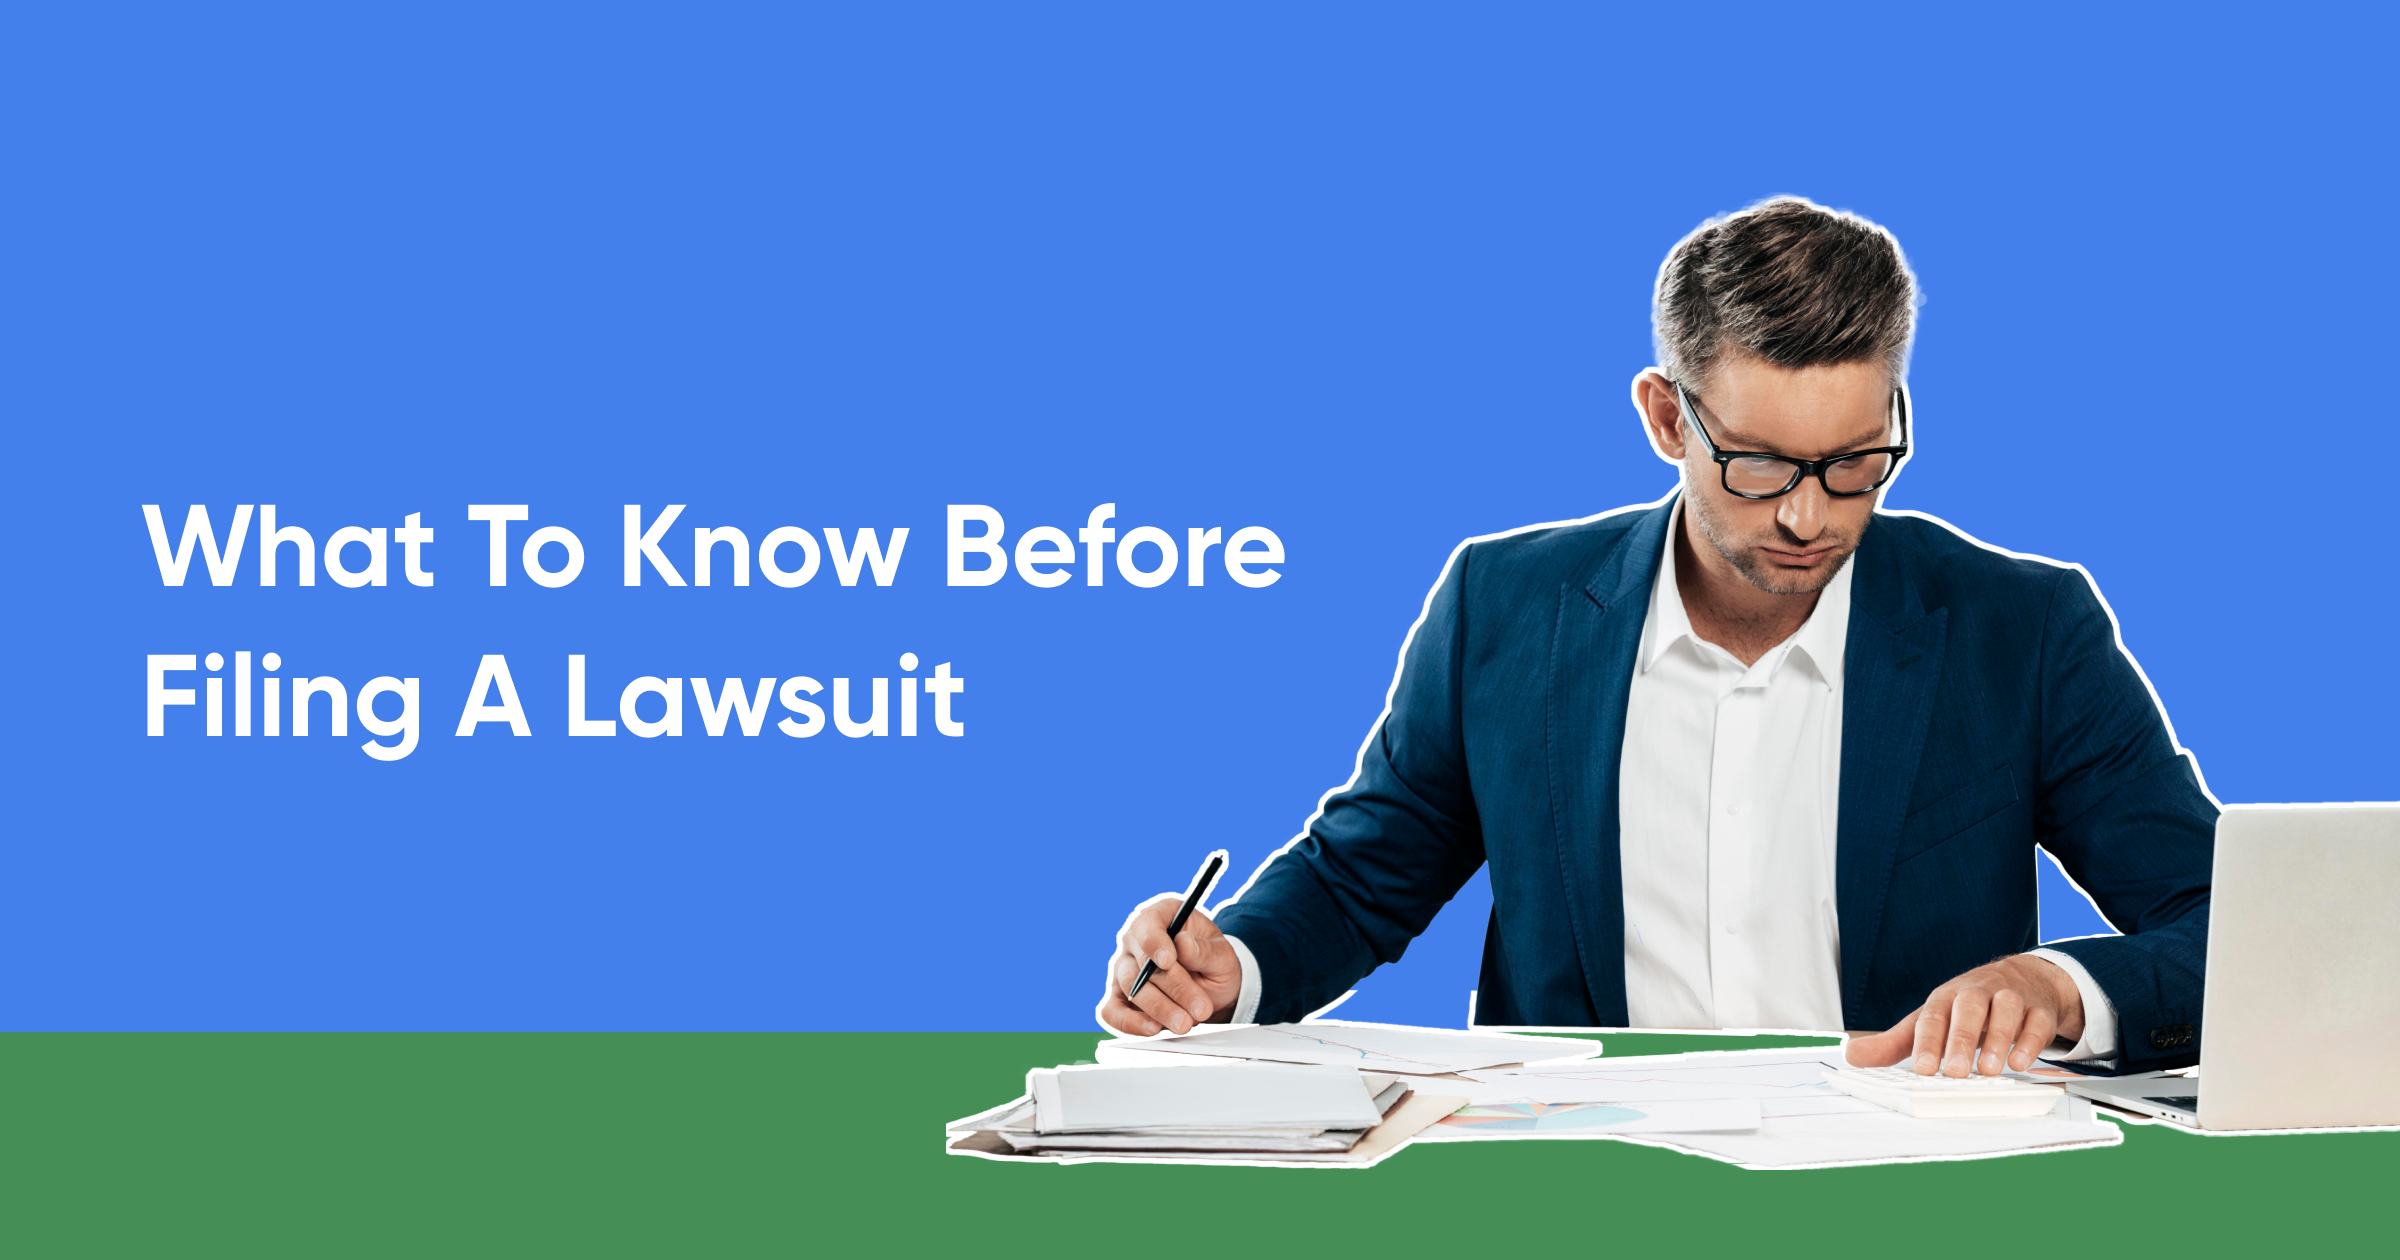 What To Know Before Filing A Lawsuit